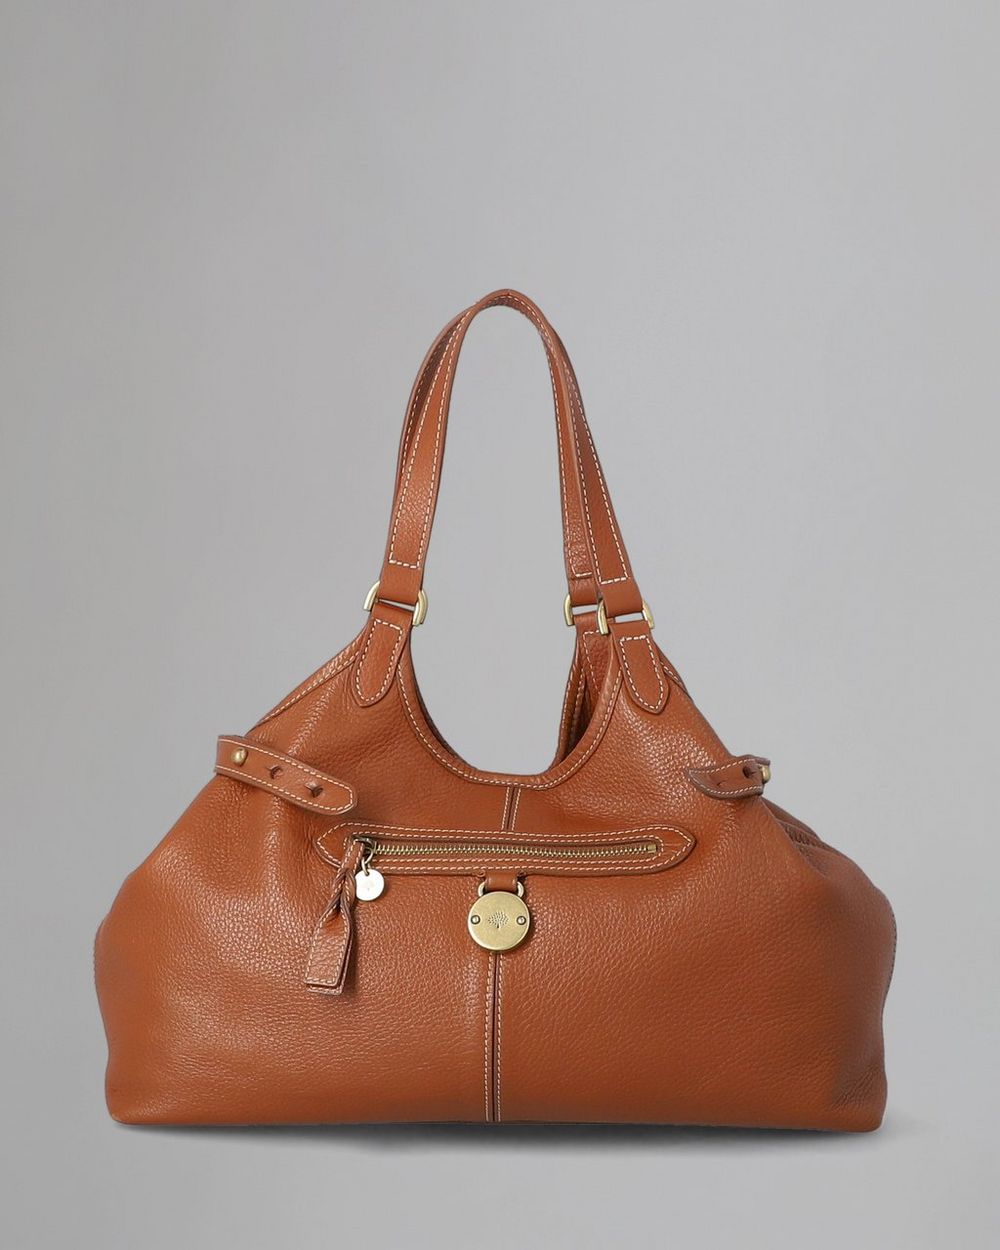 Best Mulberry Bags  Mulberry bag, Bags, Street style bags